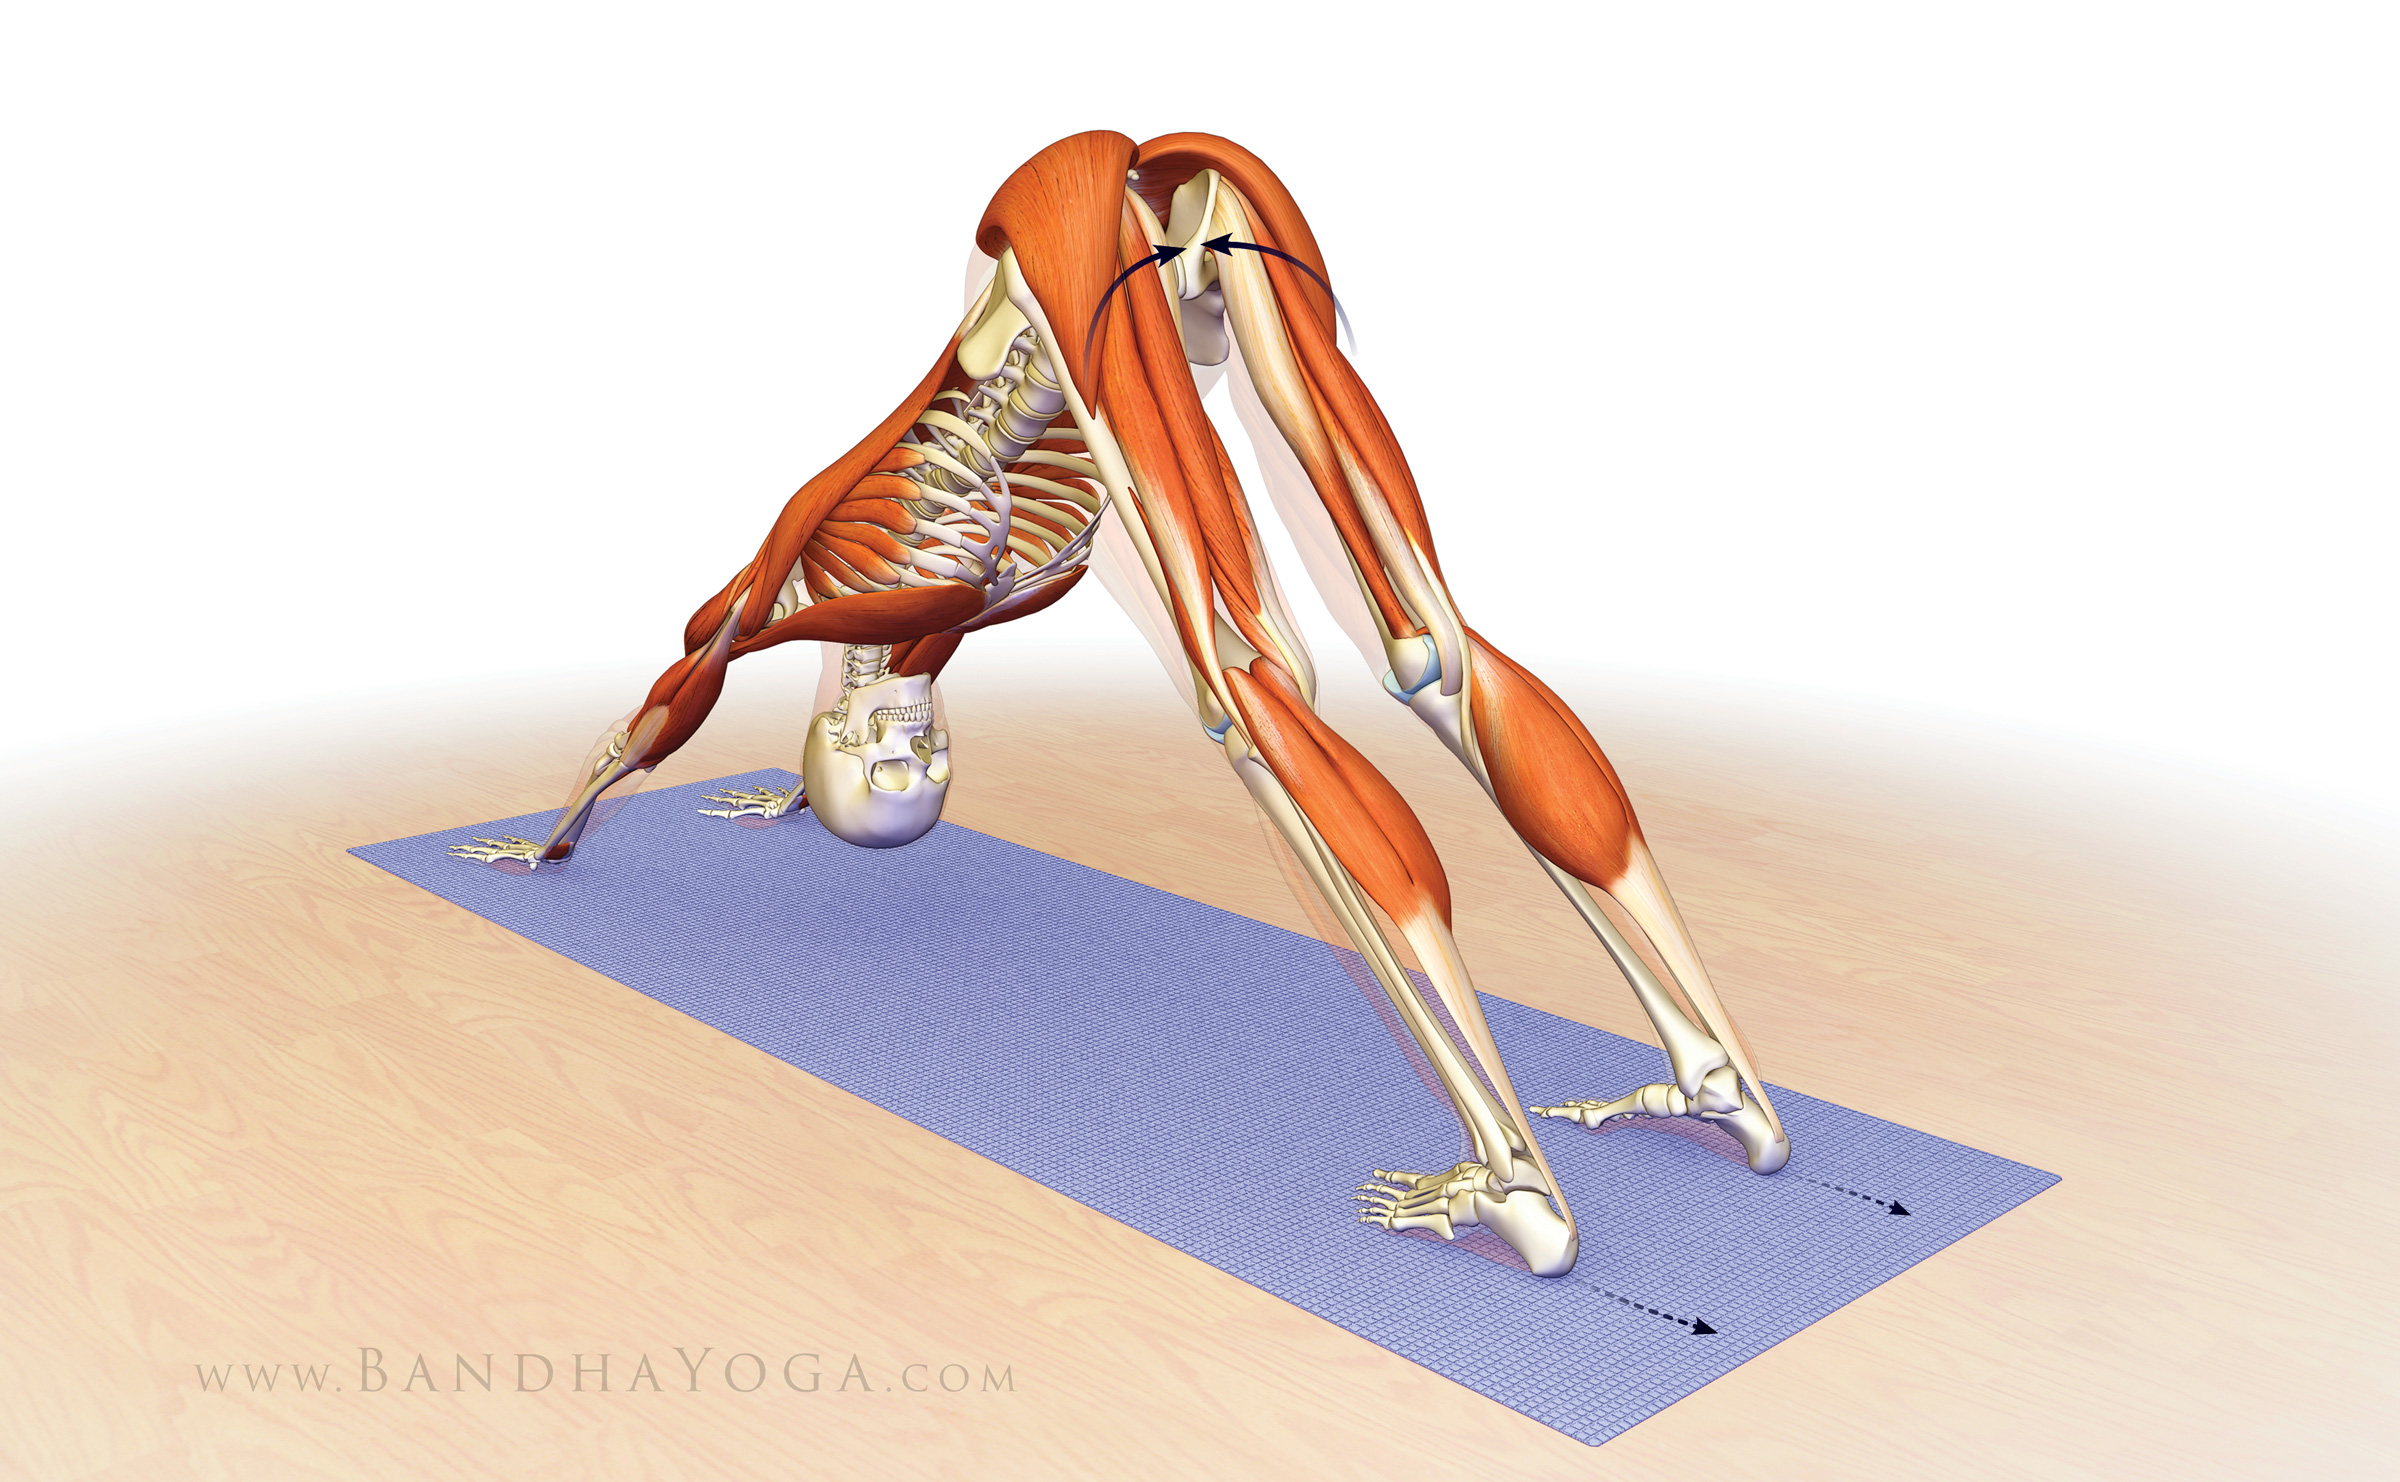 A skeleton figure in Downward Dog yoga pose, attempting to drag the feet away from the hands to stabilize the pose